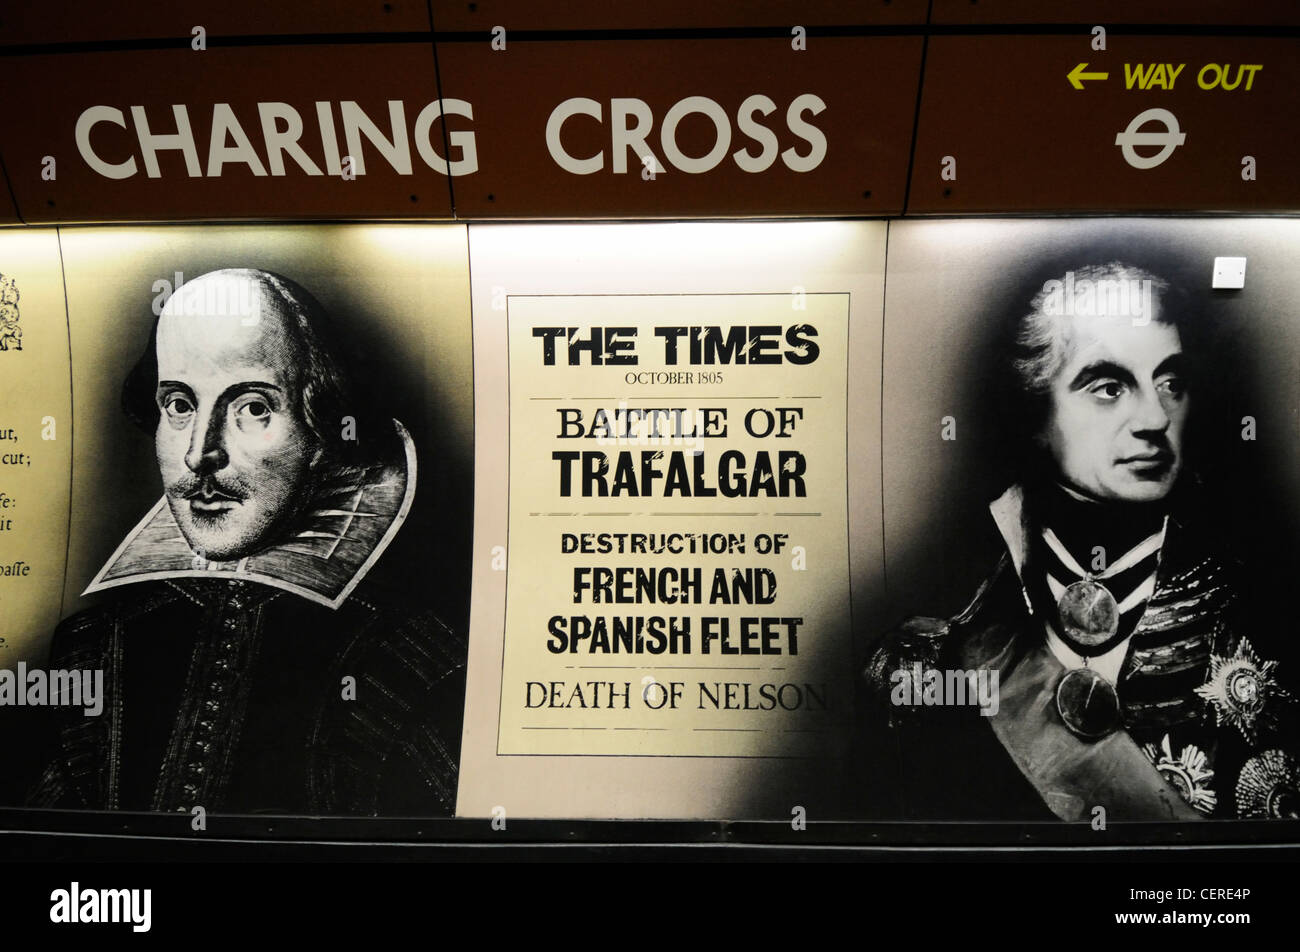 Portraits of Nelson and Shakespeare at Charing Cross Underground station. Stock Photo